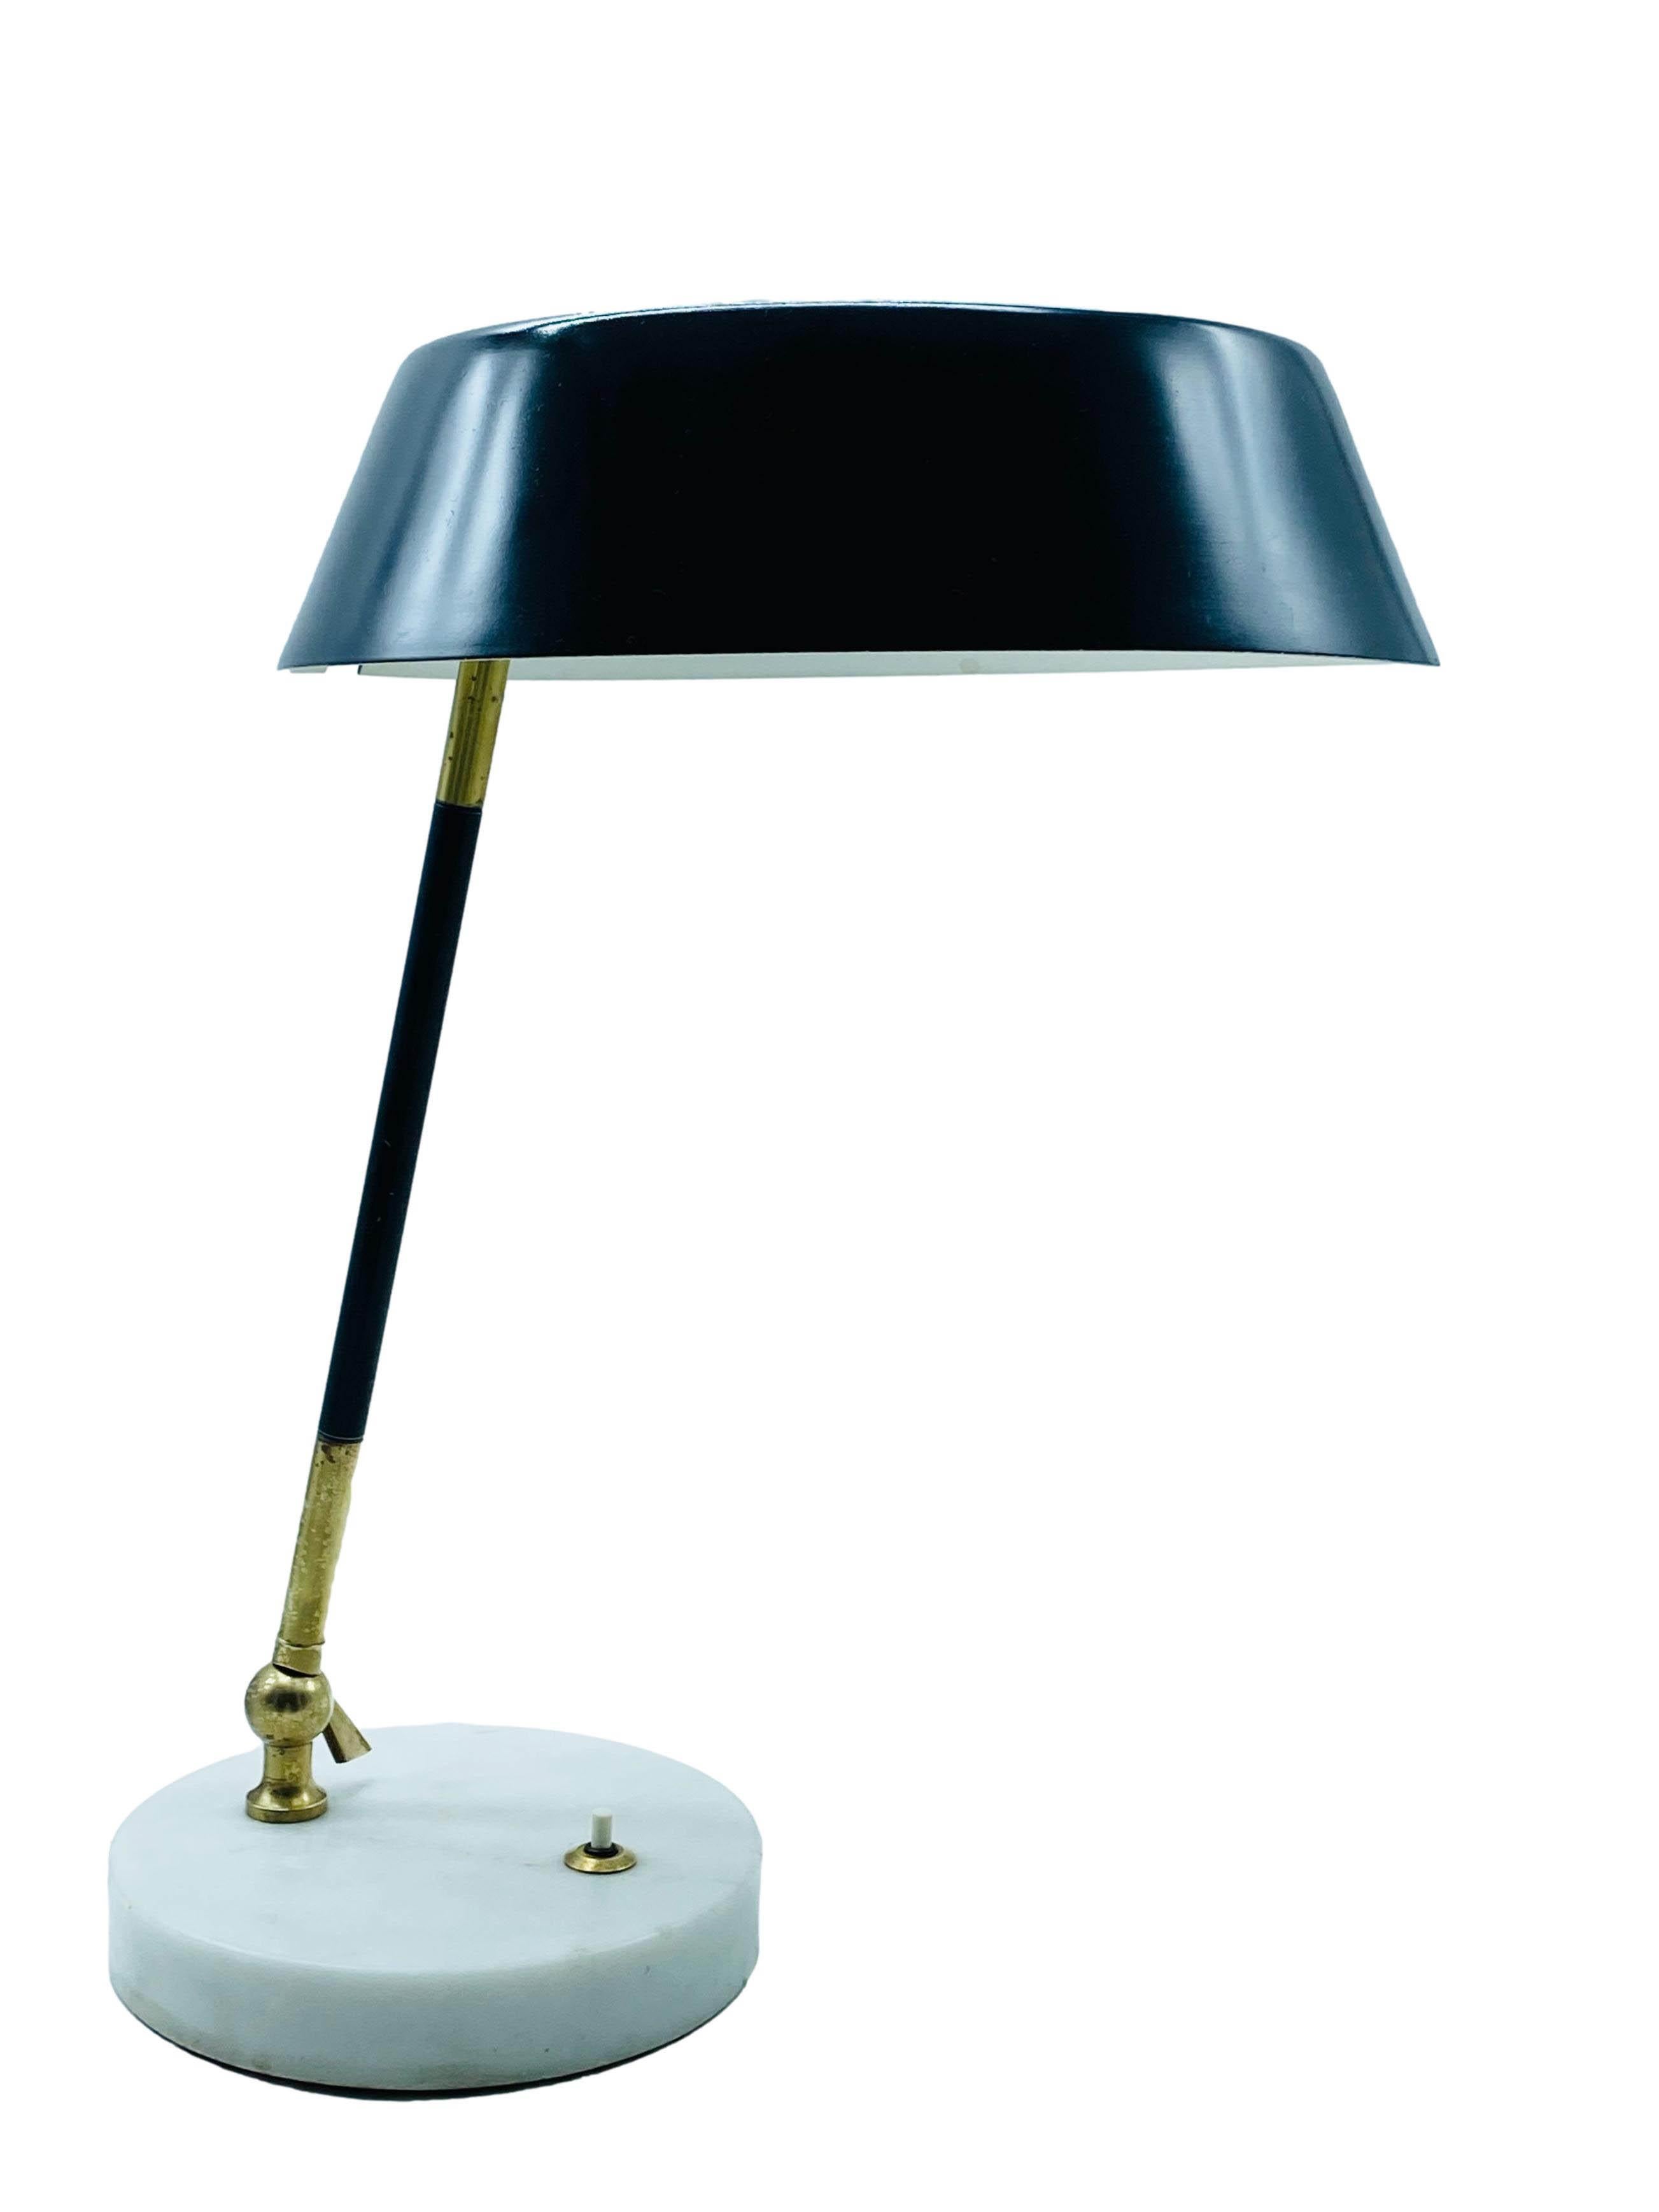 Adjustable table lamp in lacquered metal and brass, marble base, opal white perspex reflector. Stilux Italia 1950 production.